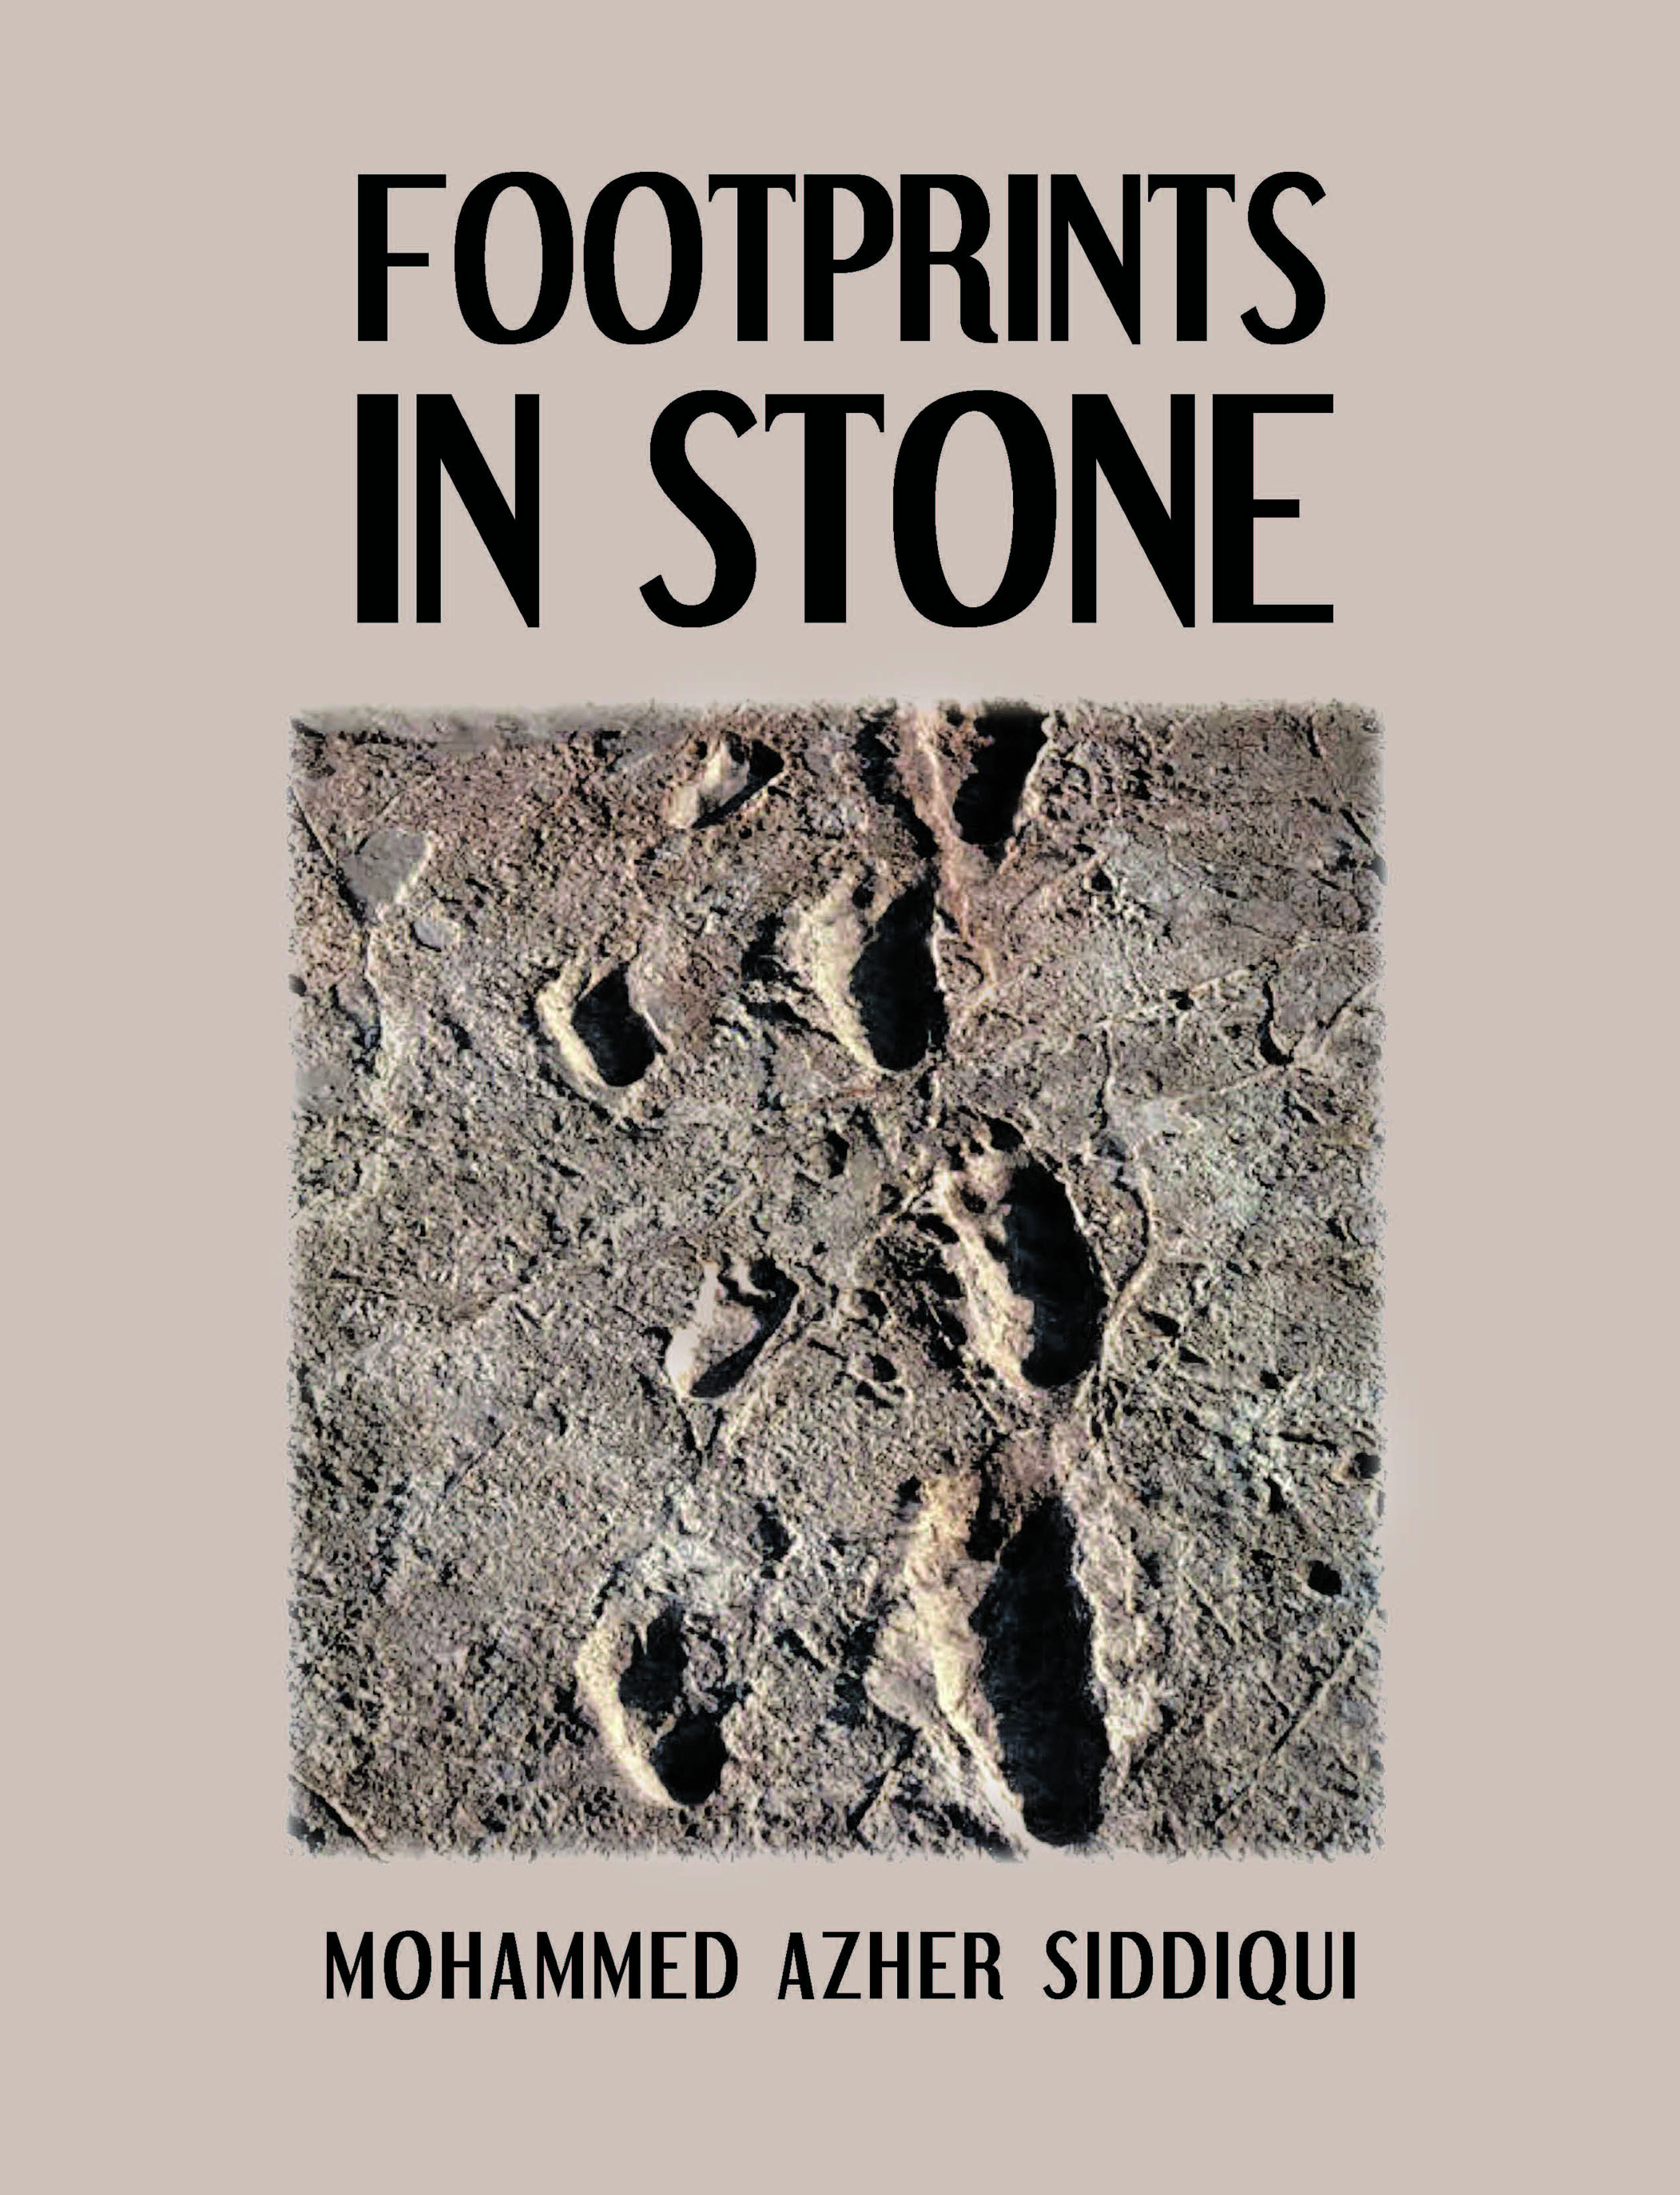 Author Mohammed Azher Siddiqui’s New Book, "Footprints in Stone," Explores How Human Migration Constantly Changes Cultures & What the Future of Humanity Could Look Like